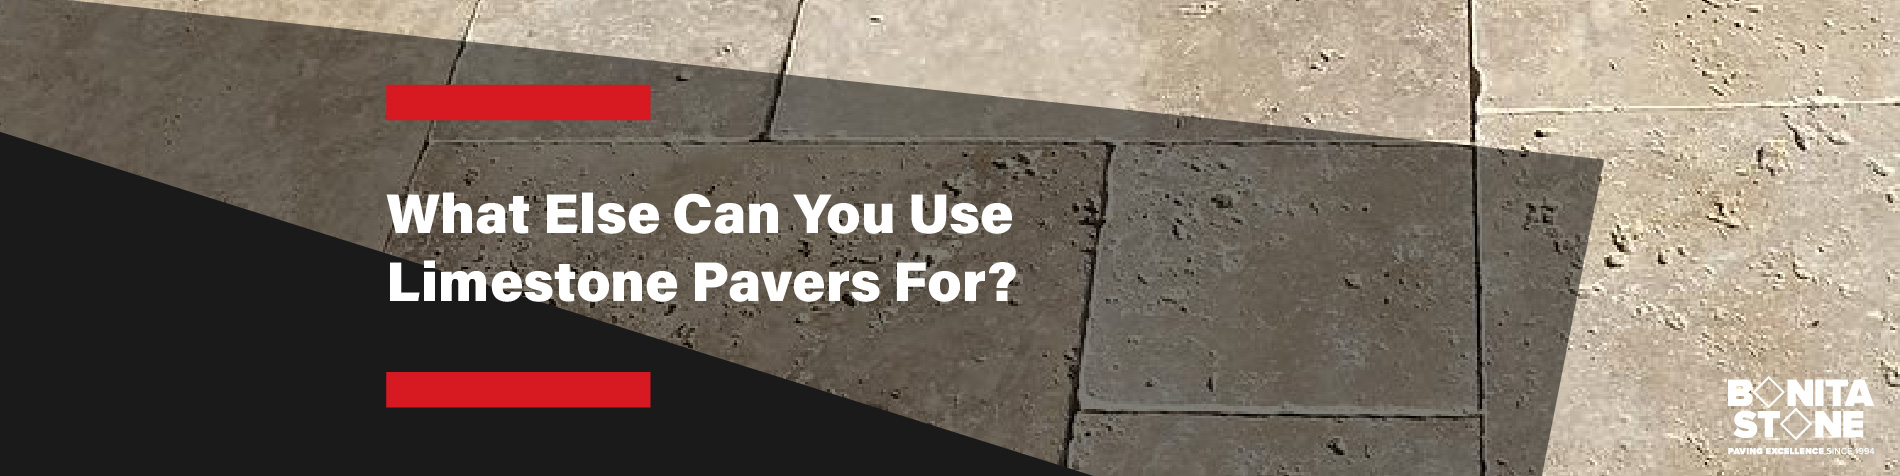 what-can-you-use-limestone-pavers-for-blog-images (3)